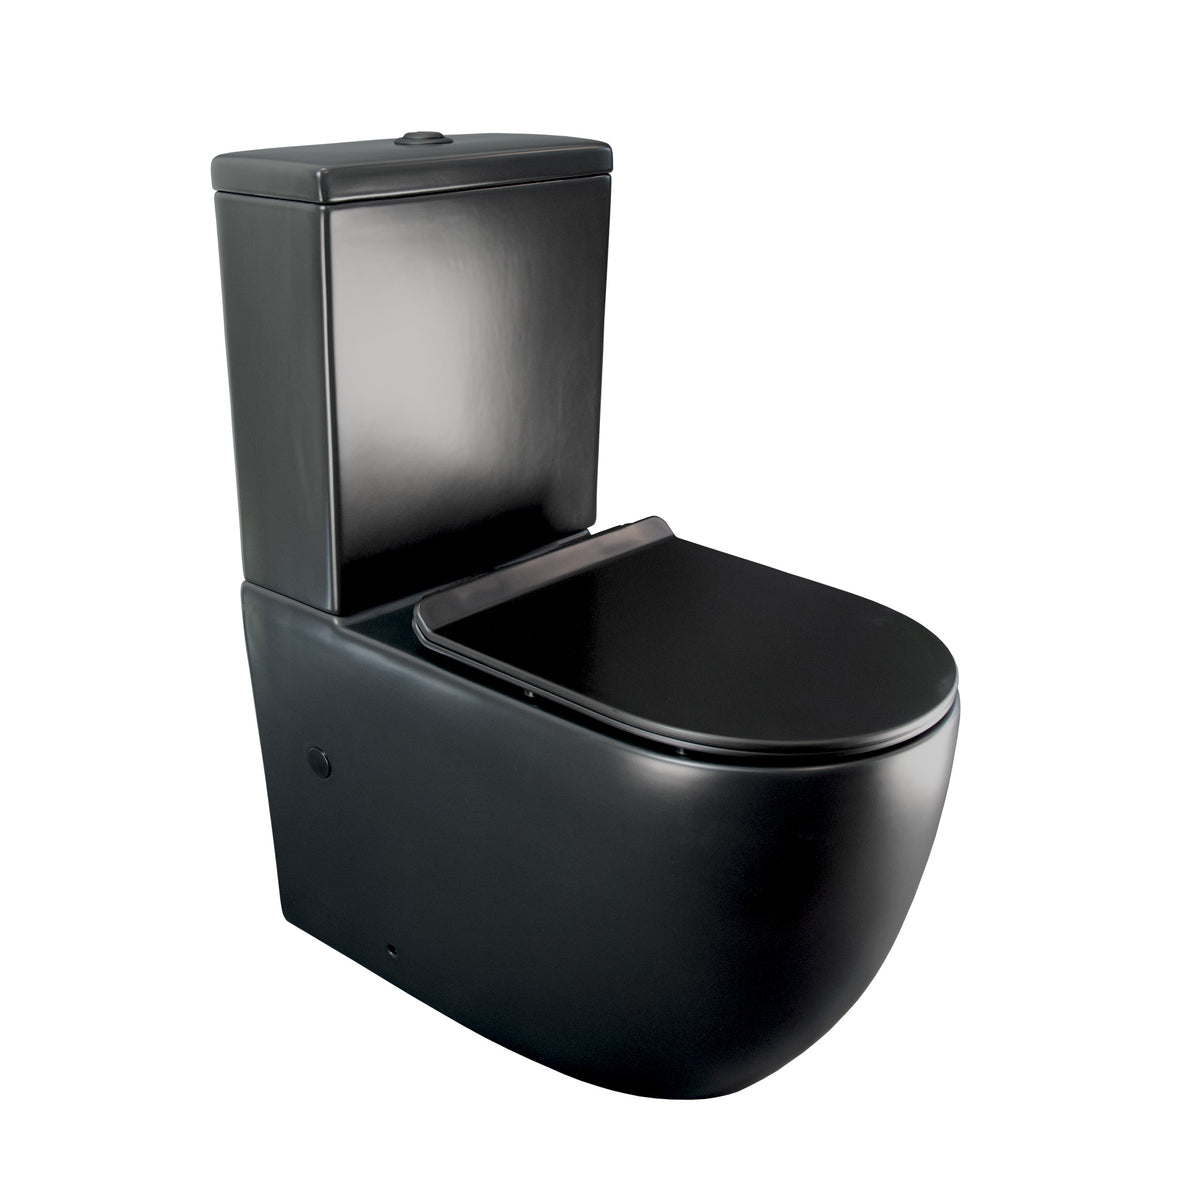 Hurricane Back-to-Wall Toilet Suite in Matte Black